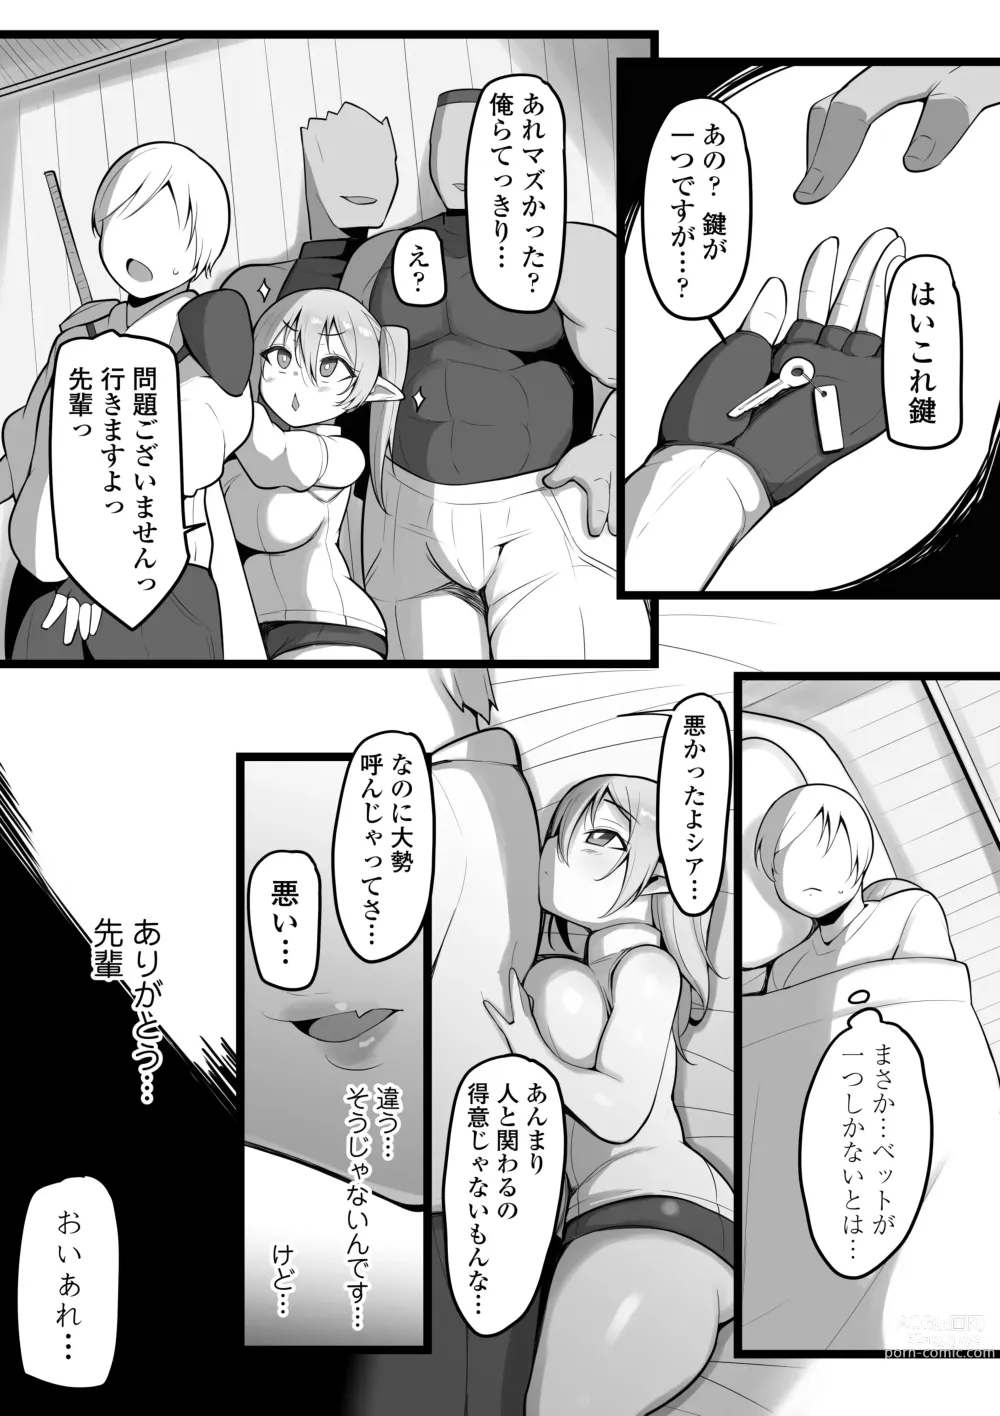 Page 9 of doujinshi NTR Guild